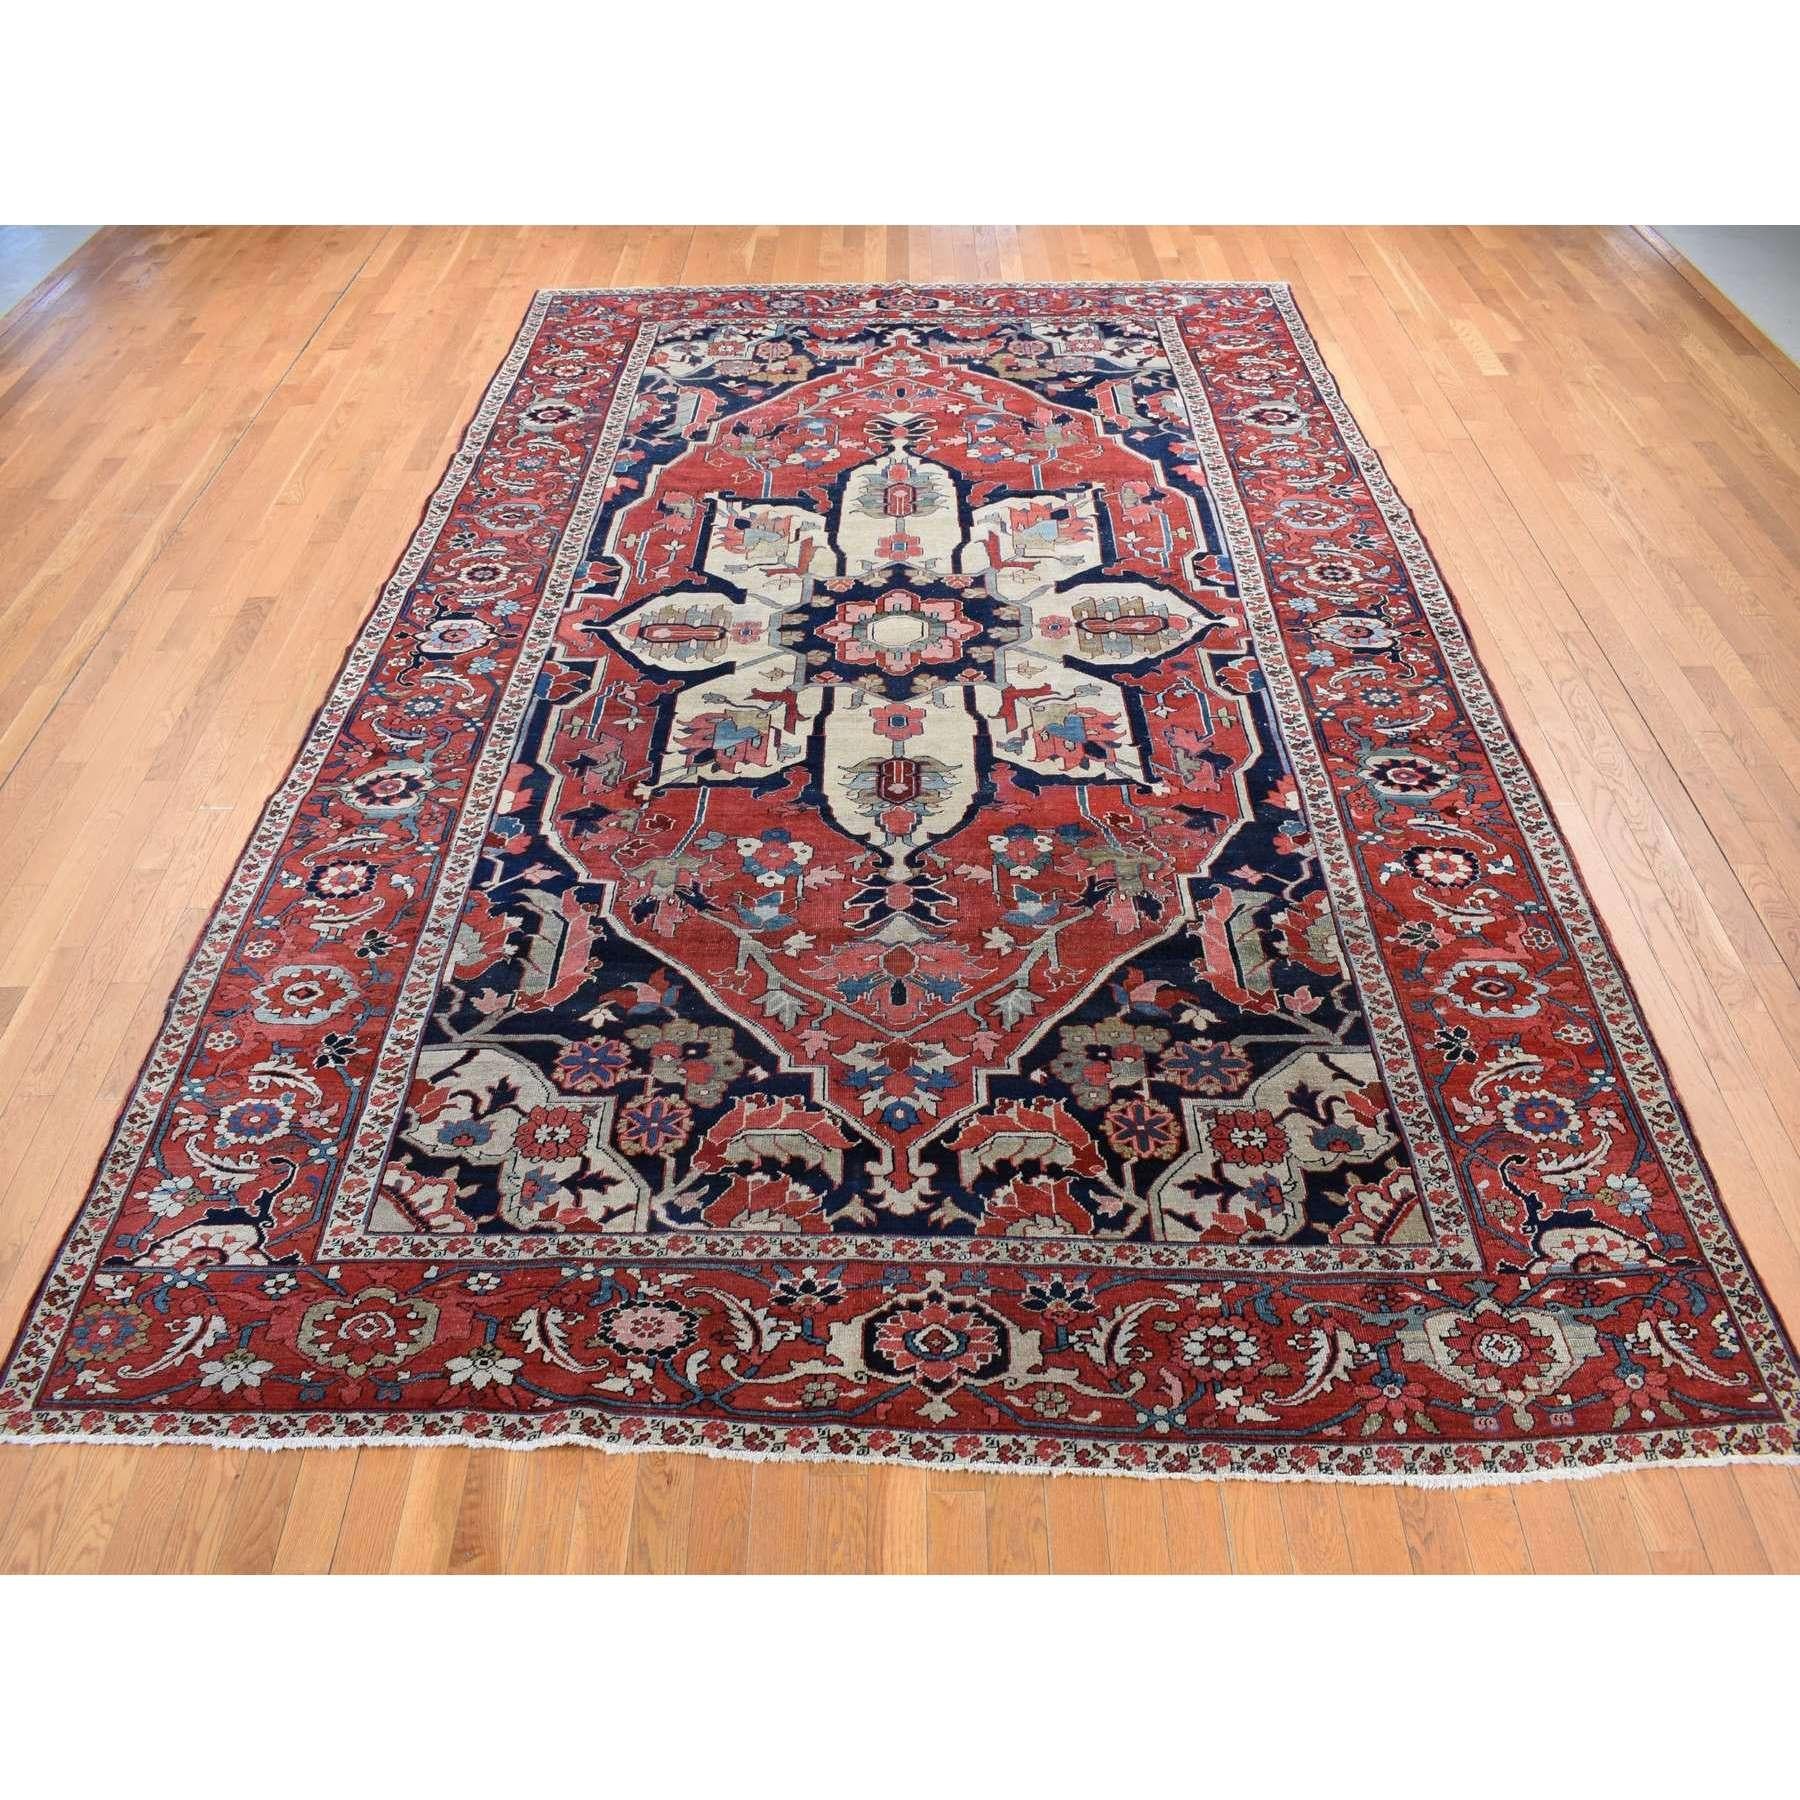 Medieval Red Antique Persian Serapi Heriz Flower Design Pure Wool Clean Hand Knotted Rug